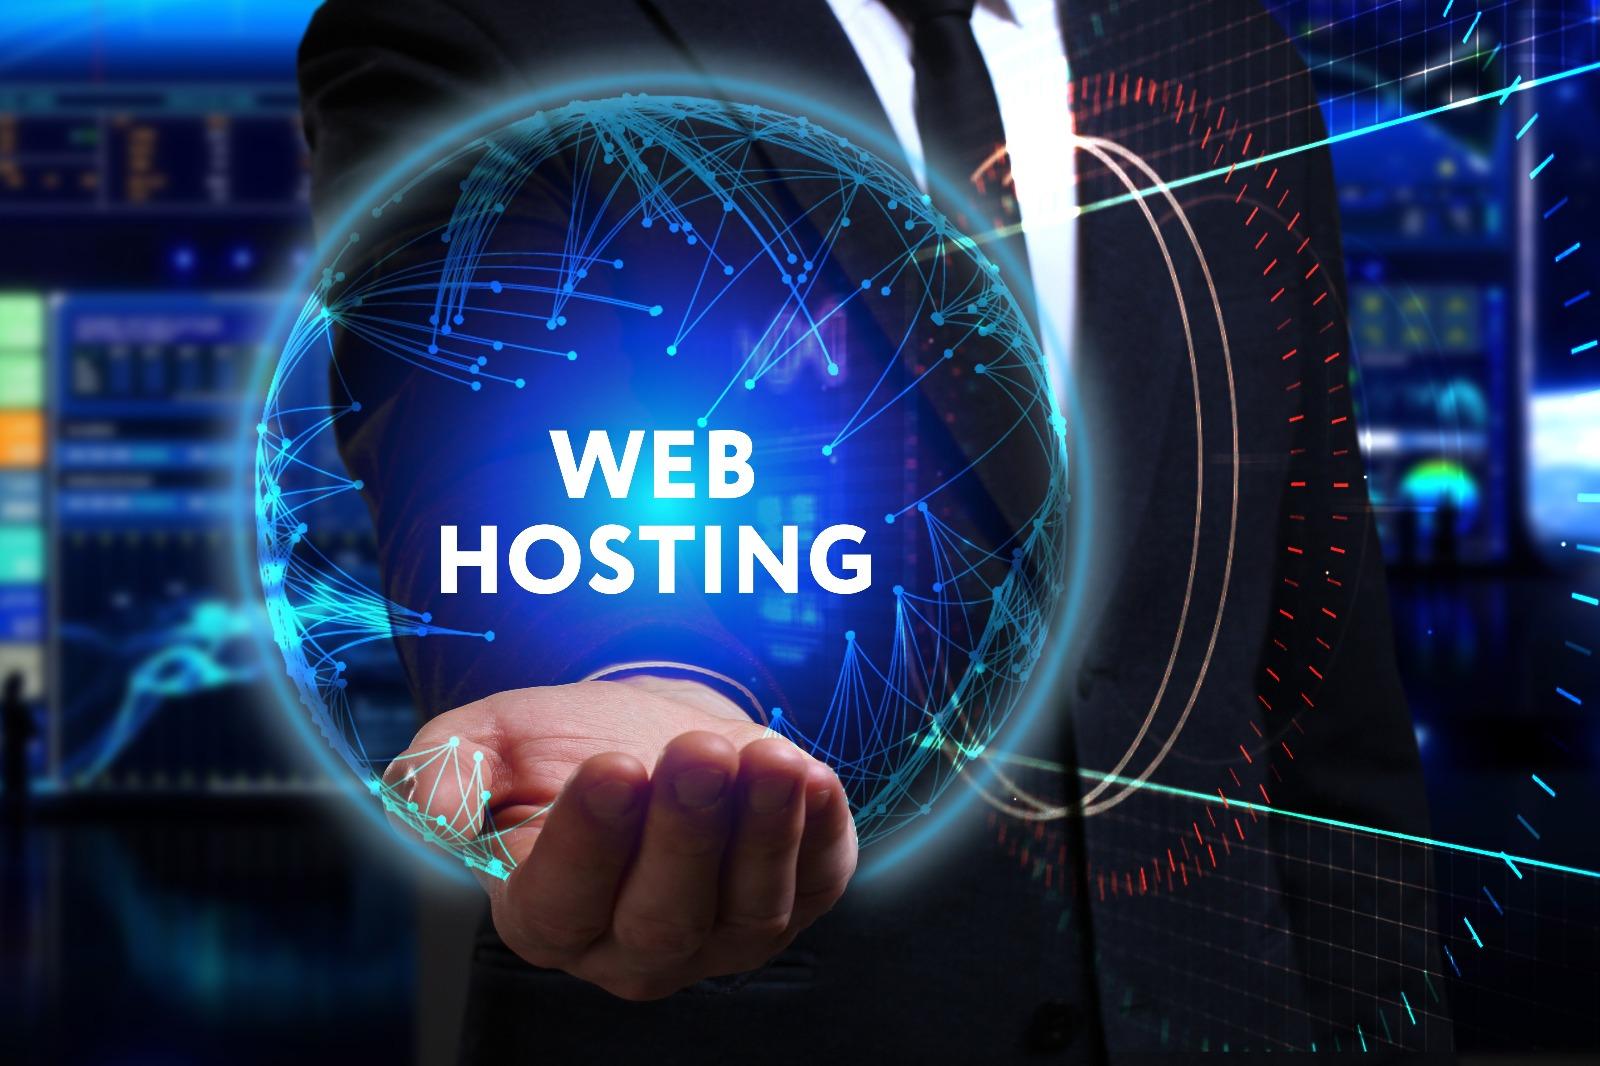 Top 5 Reasons to Use WP Web Hosting for E-Commerce